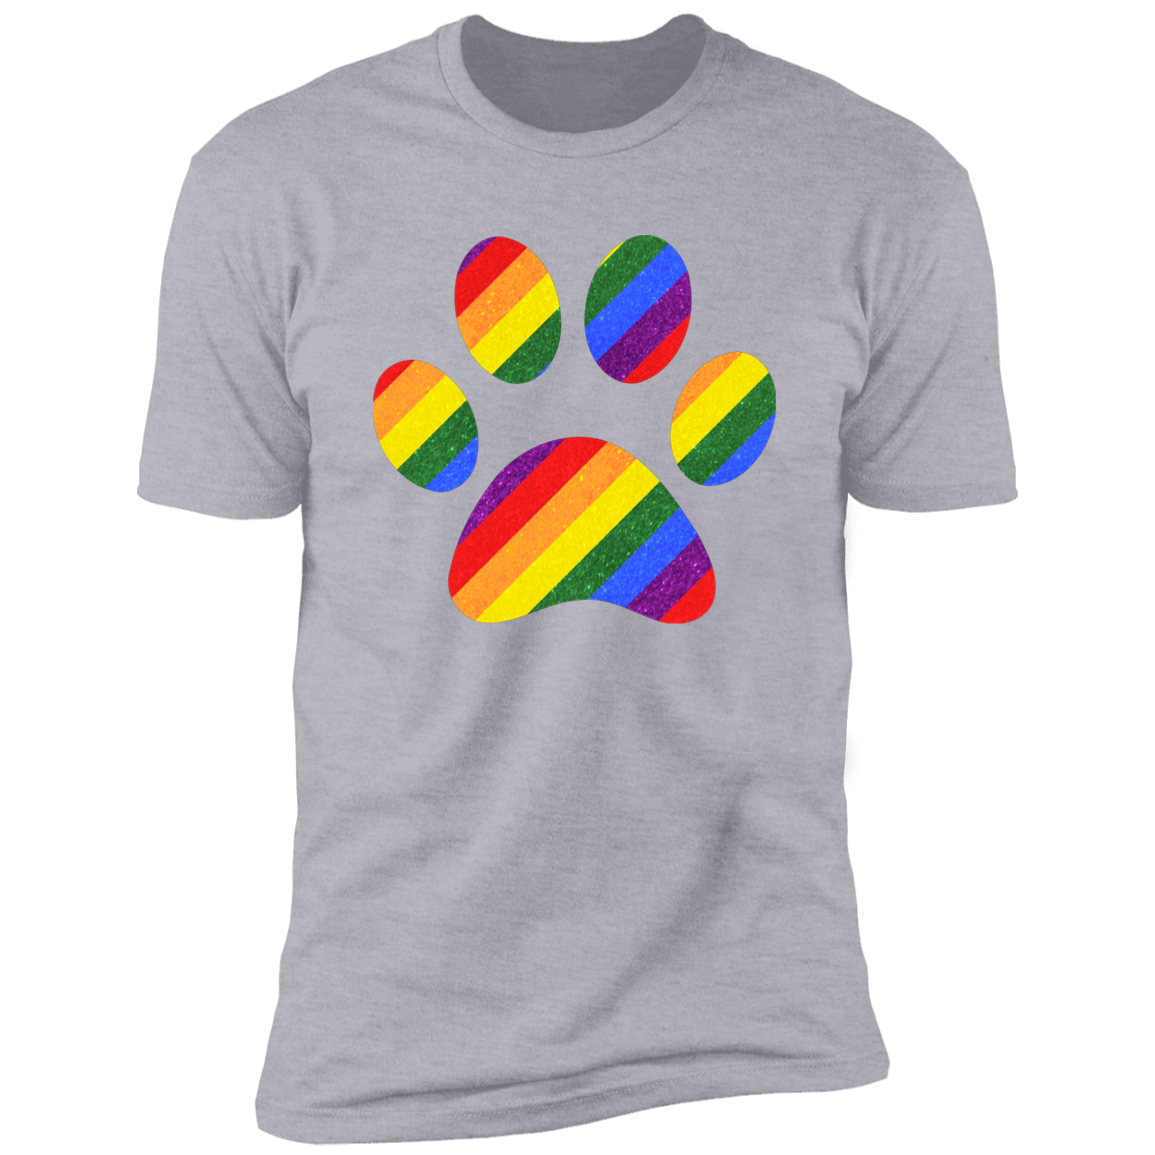 Pride Paw (Sparkles) Pride T-shirt, Paw Pride Dog Shirt for humans, in light heather gray